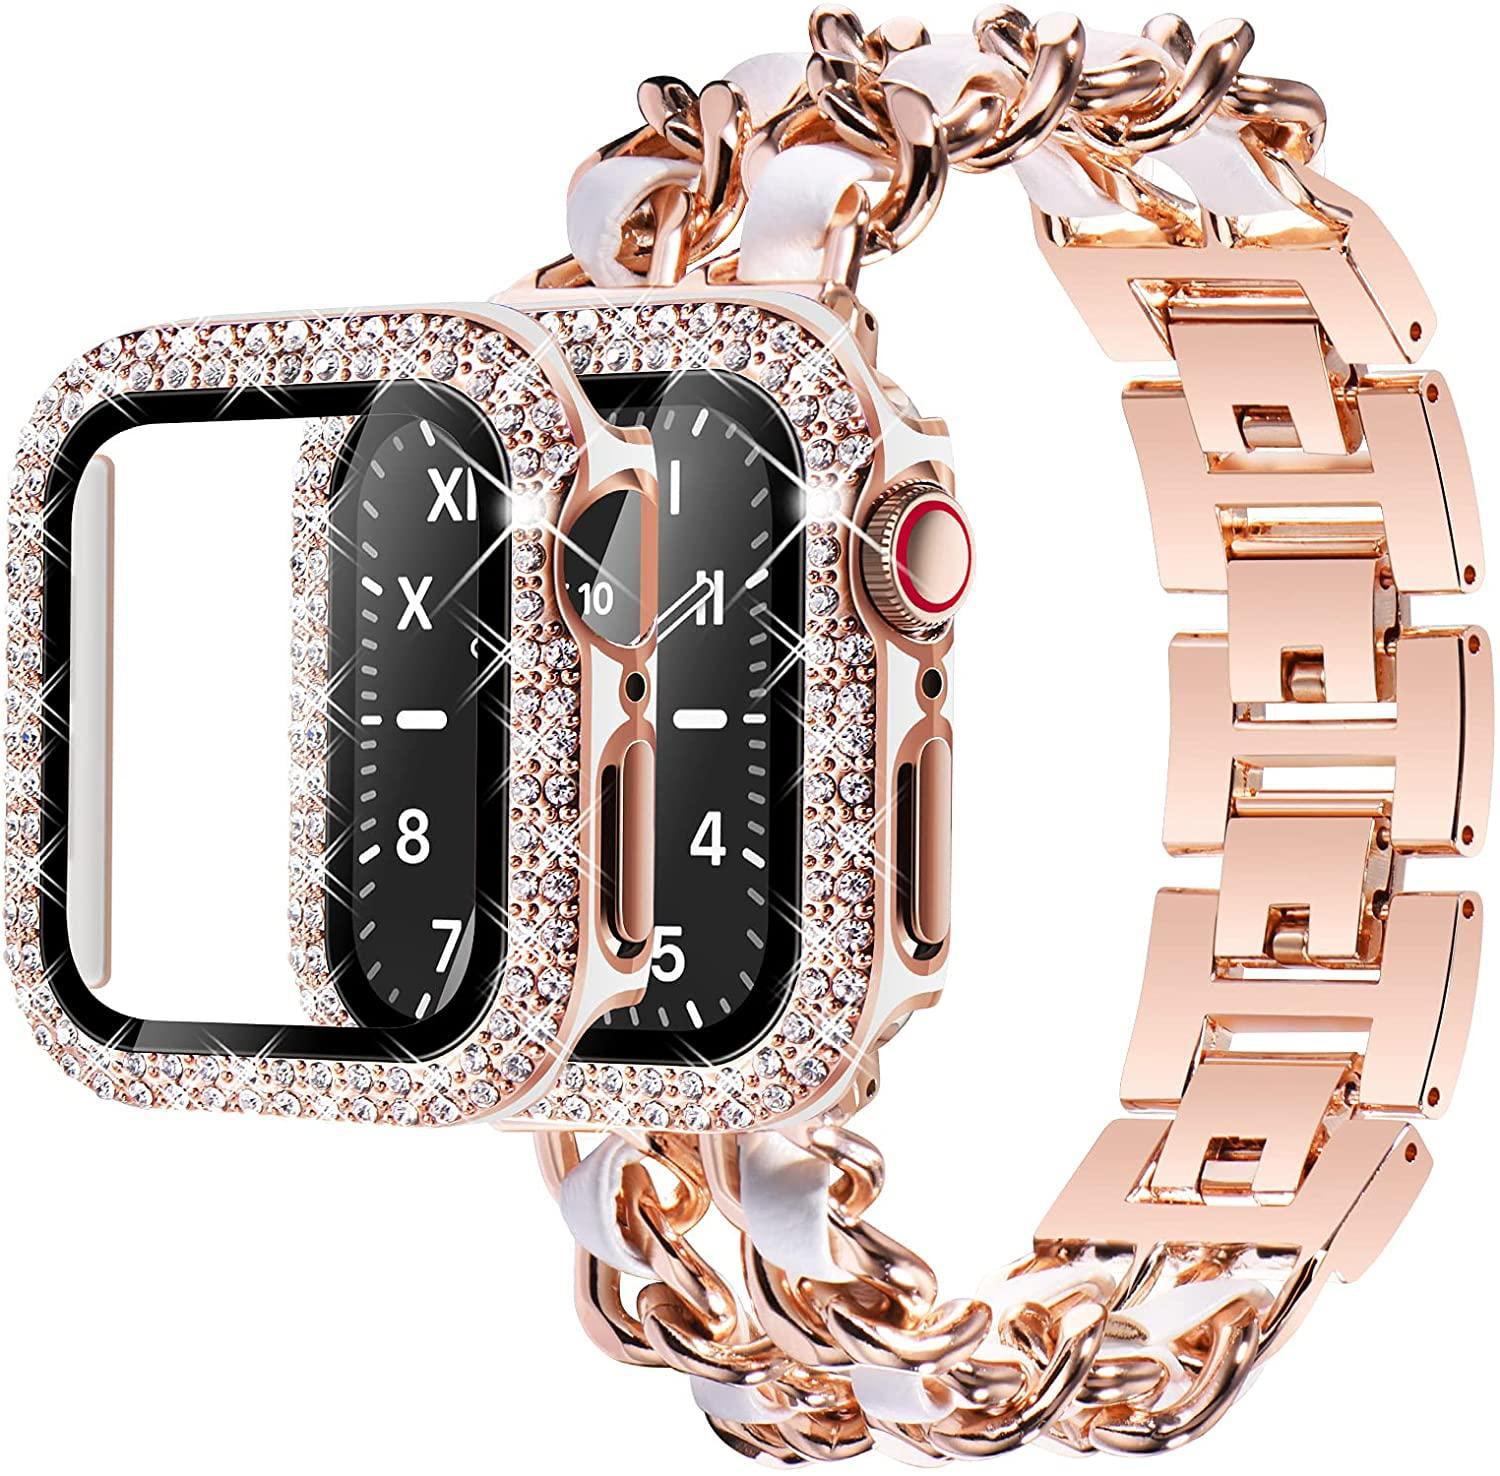 Hard Case Watch Cover 42mm Metal Metal Leather 7 Bumper Band Interwoven 44mm Apple for 8 41mm Series Strap iWatch for 45mm Stainless Chain 38mm and 40mm Bling YuiYuKa Link Steel with